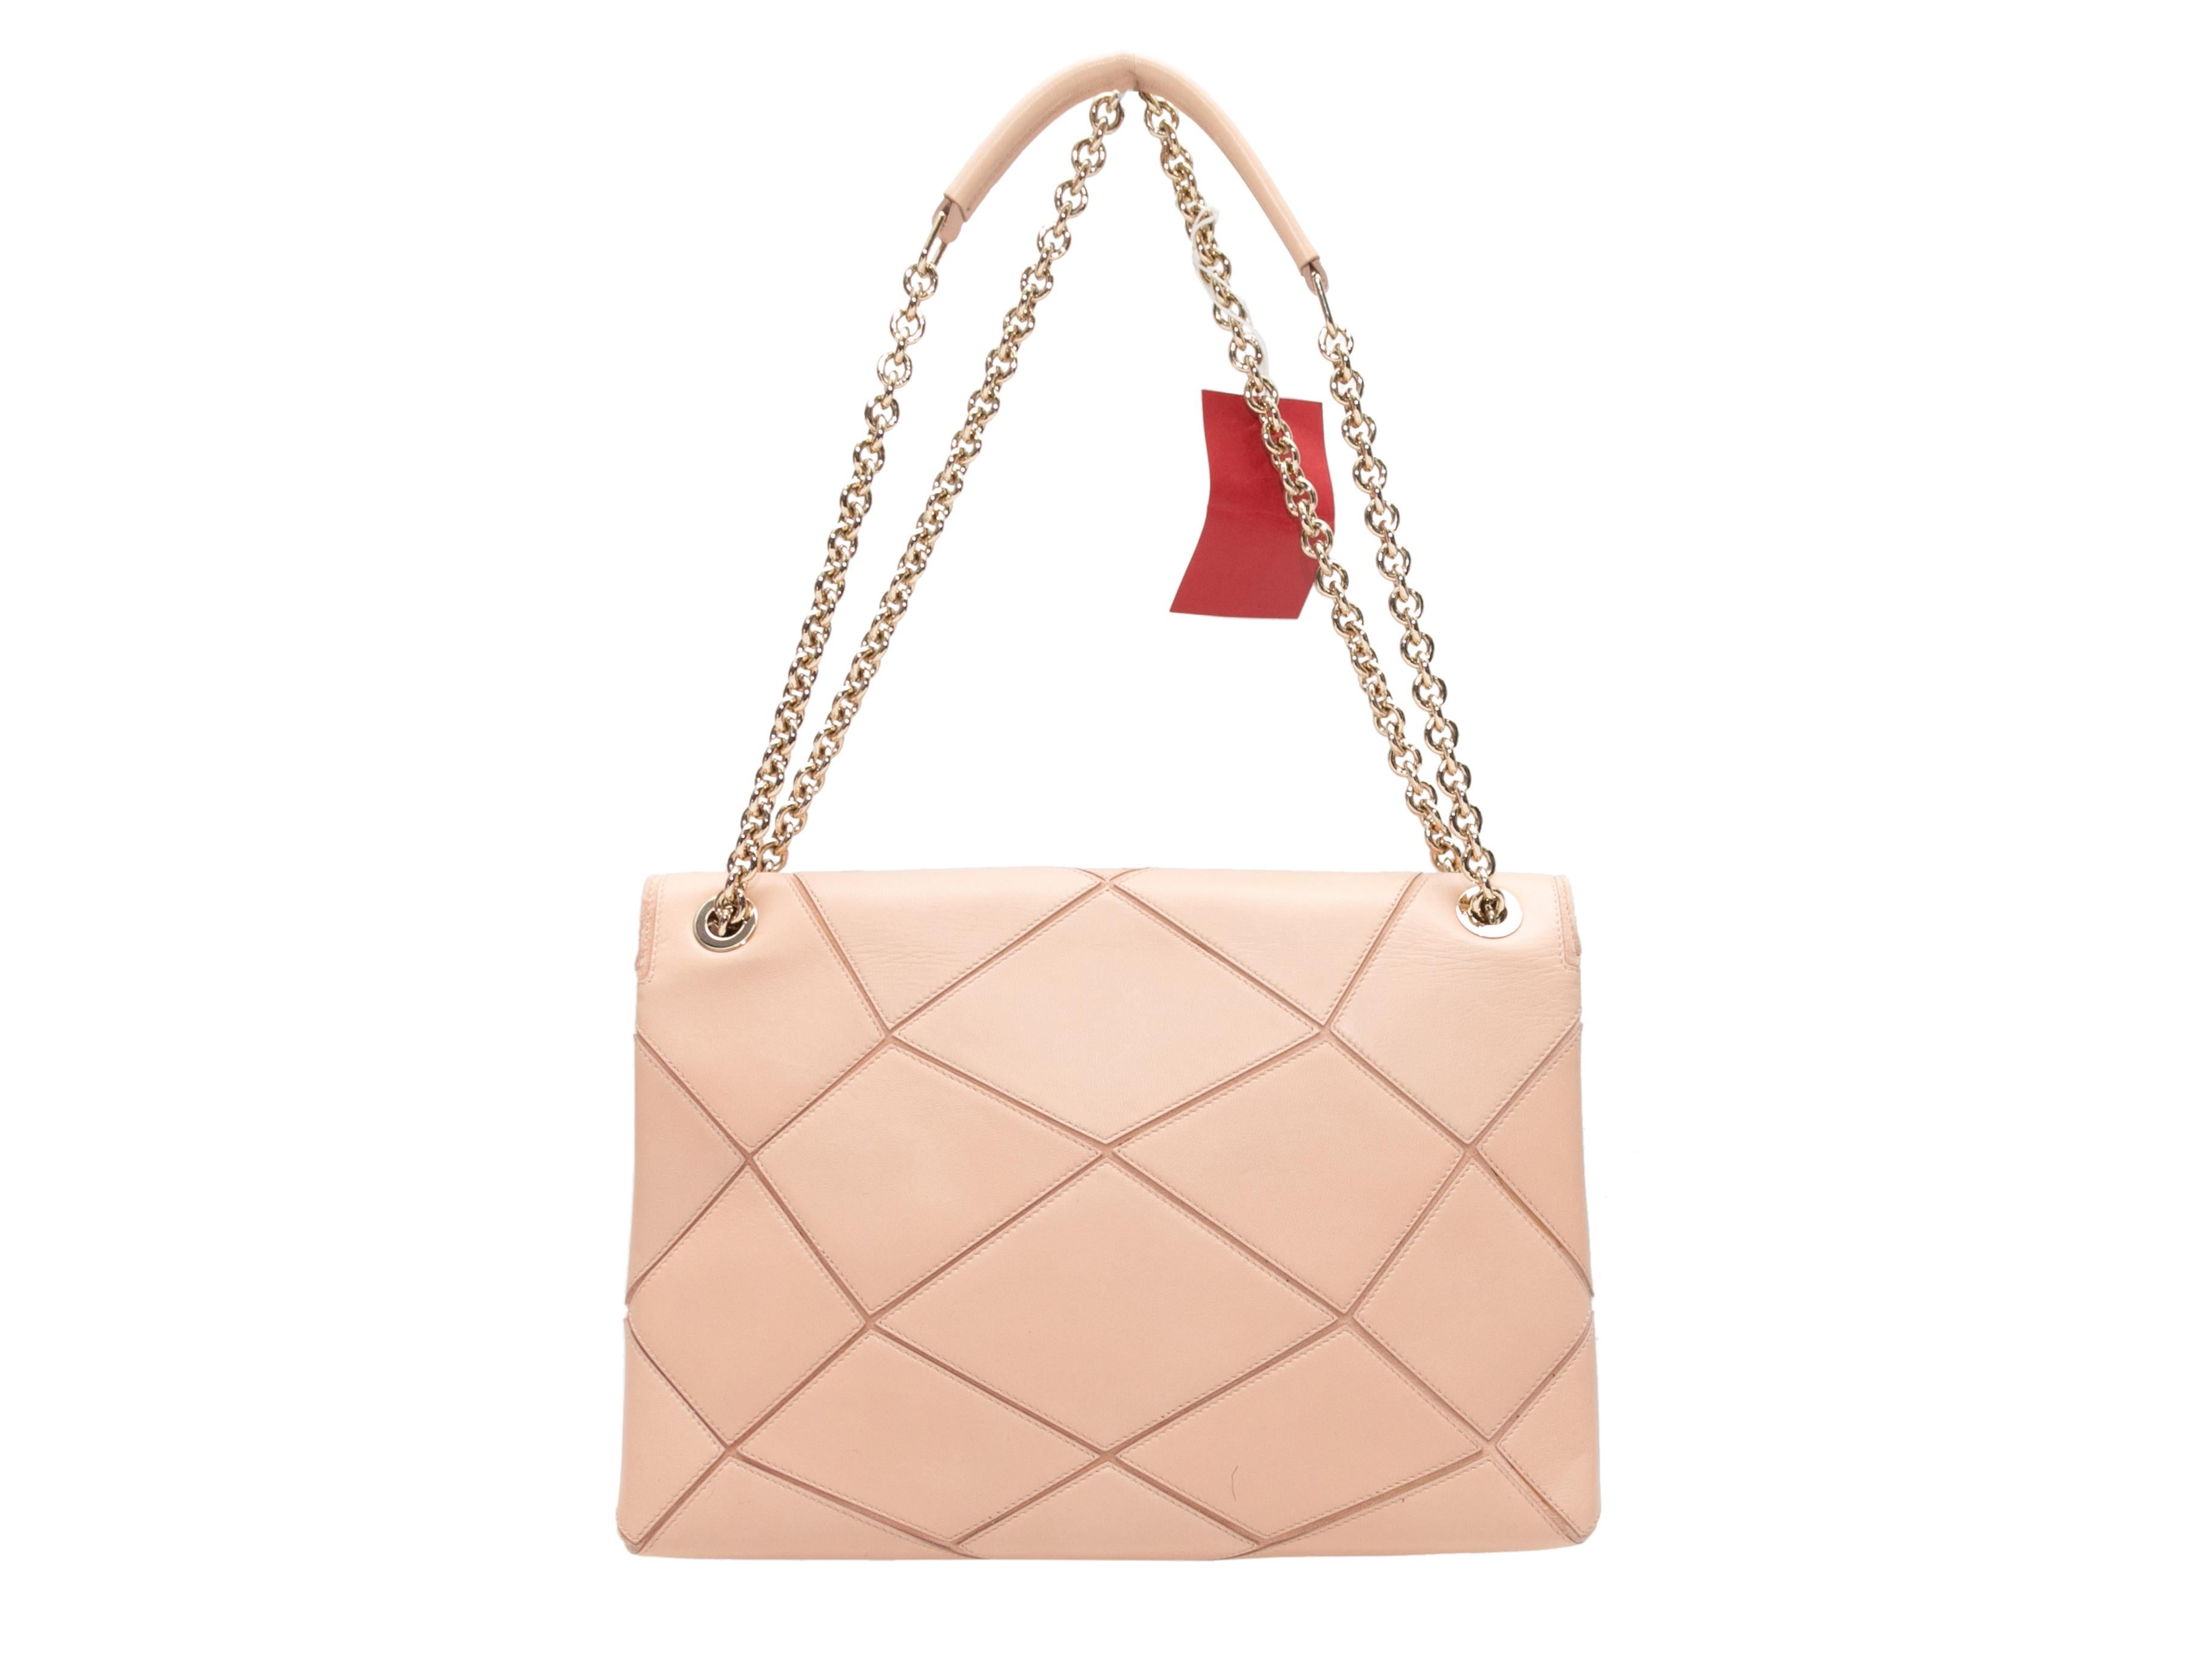 Beige Roger Vivier Geometric Patterned Shoulder Bag. This shoulder bag features a leather body, gold-tone hardware, dual chain-link and leather shoulder straps, and a front flap closure. 11.75